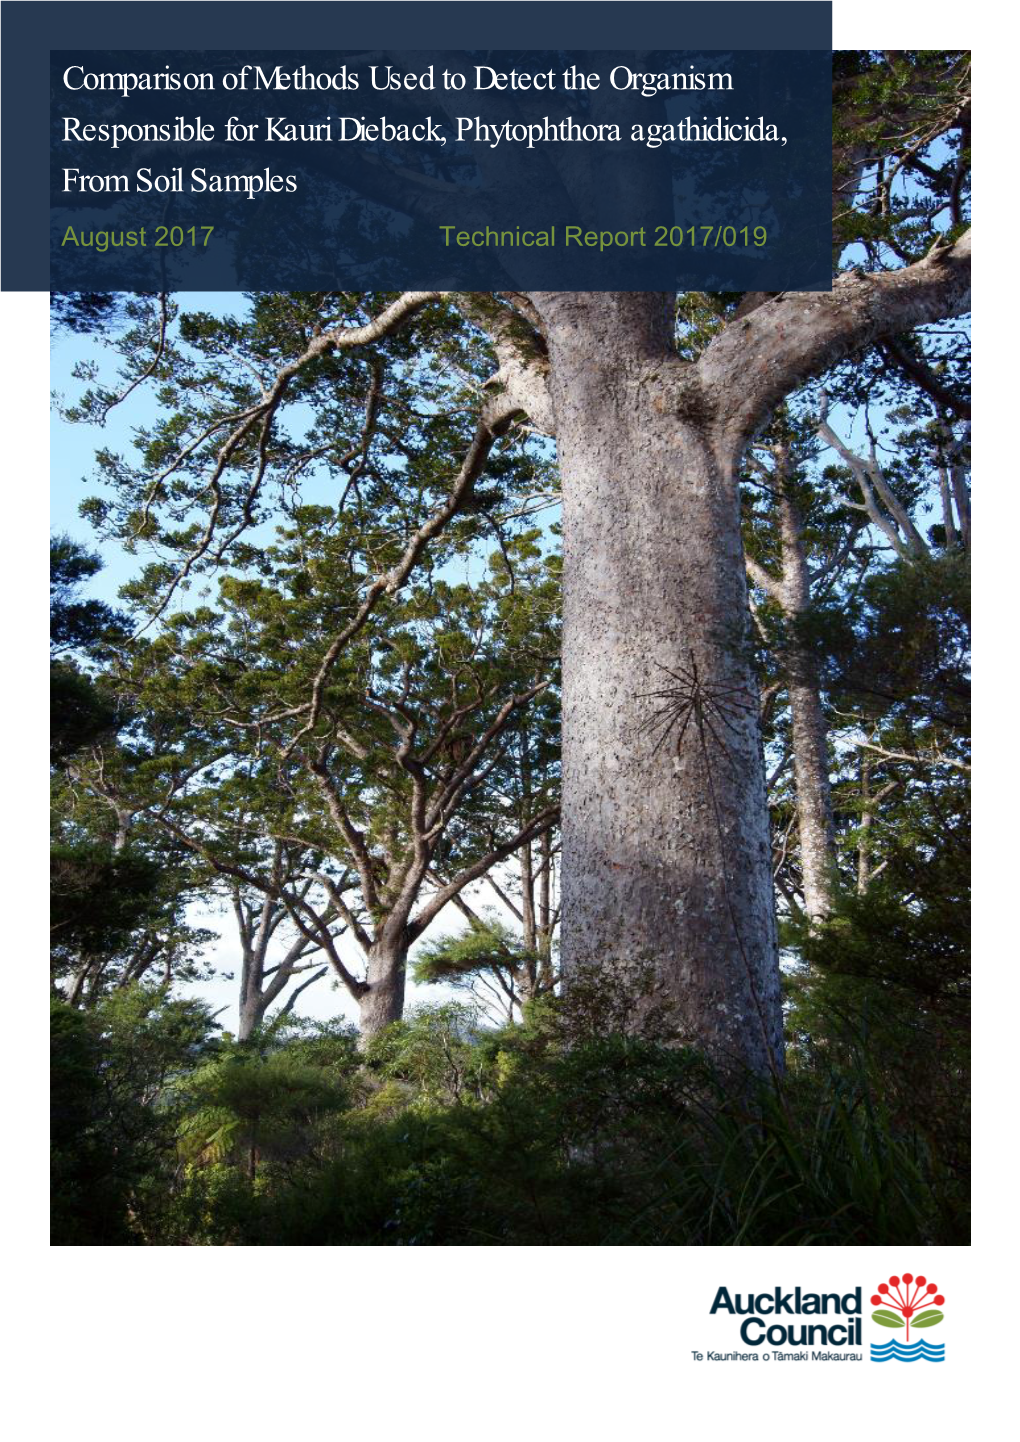 Comparison of Methods Used to Detect the Organism Responsible for Kauri Dieback, Phytophthora Agathidicida, from Soil Samples August 2017 Technical Report 2017/019